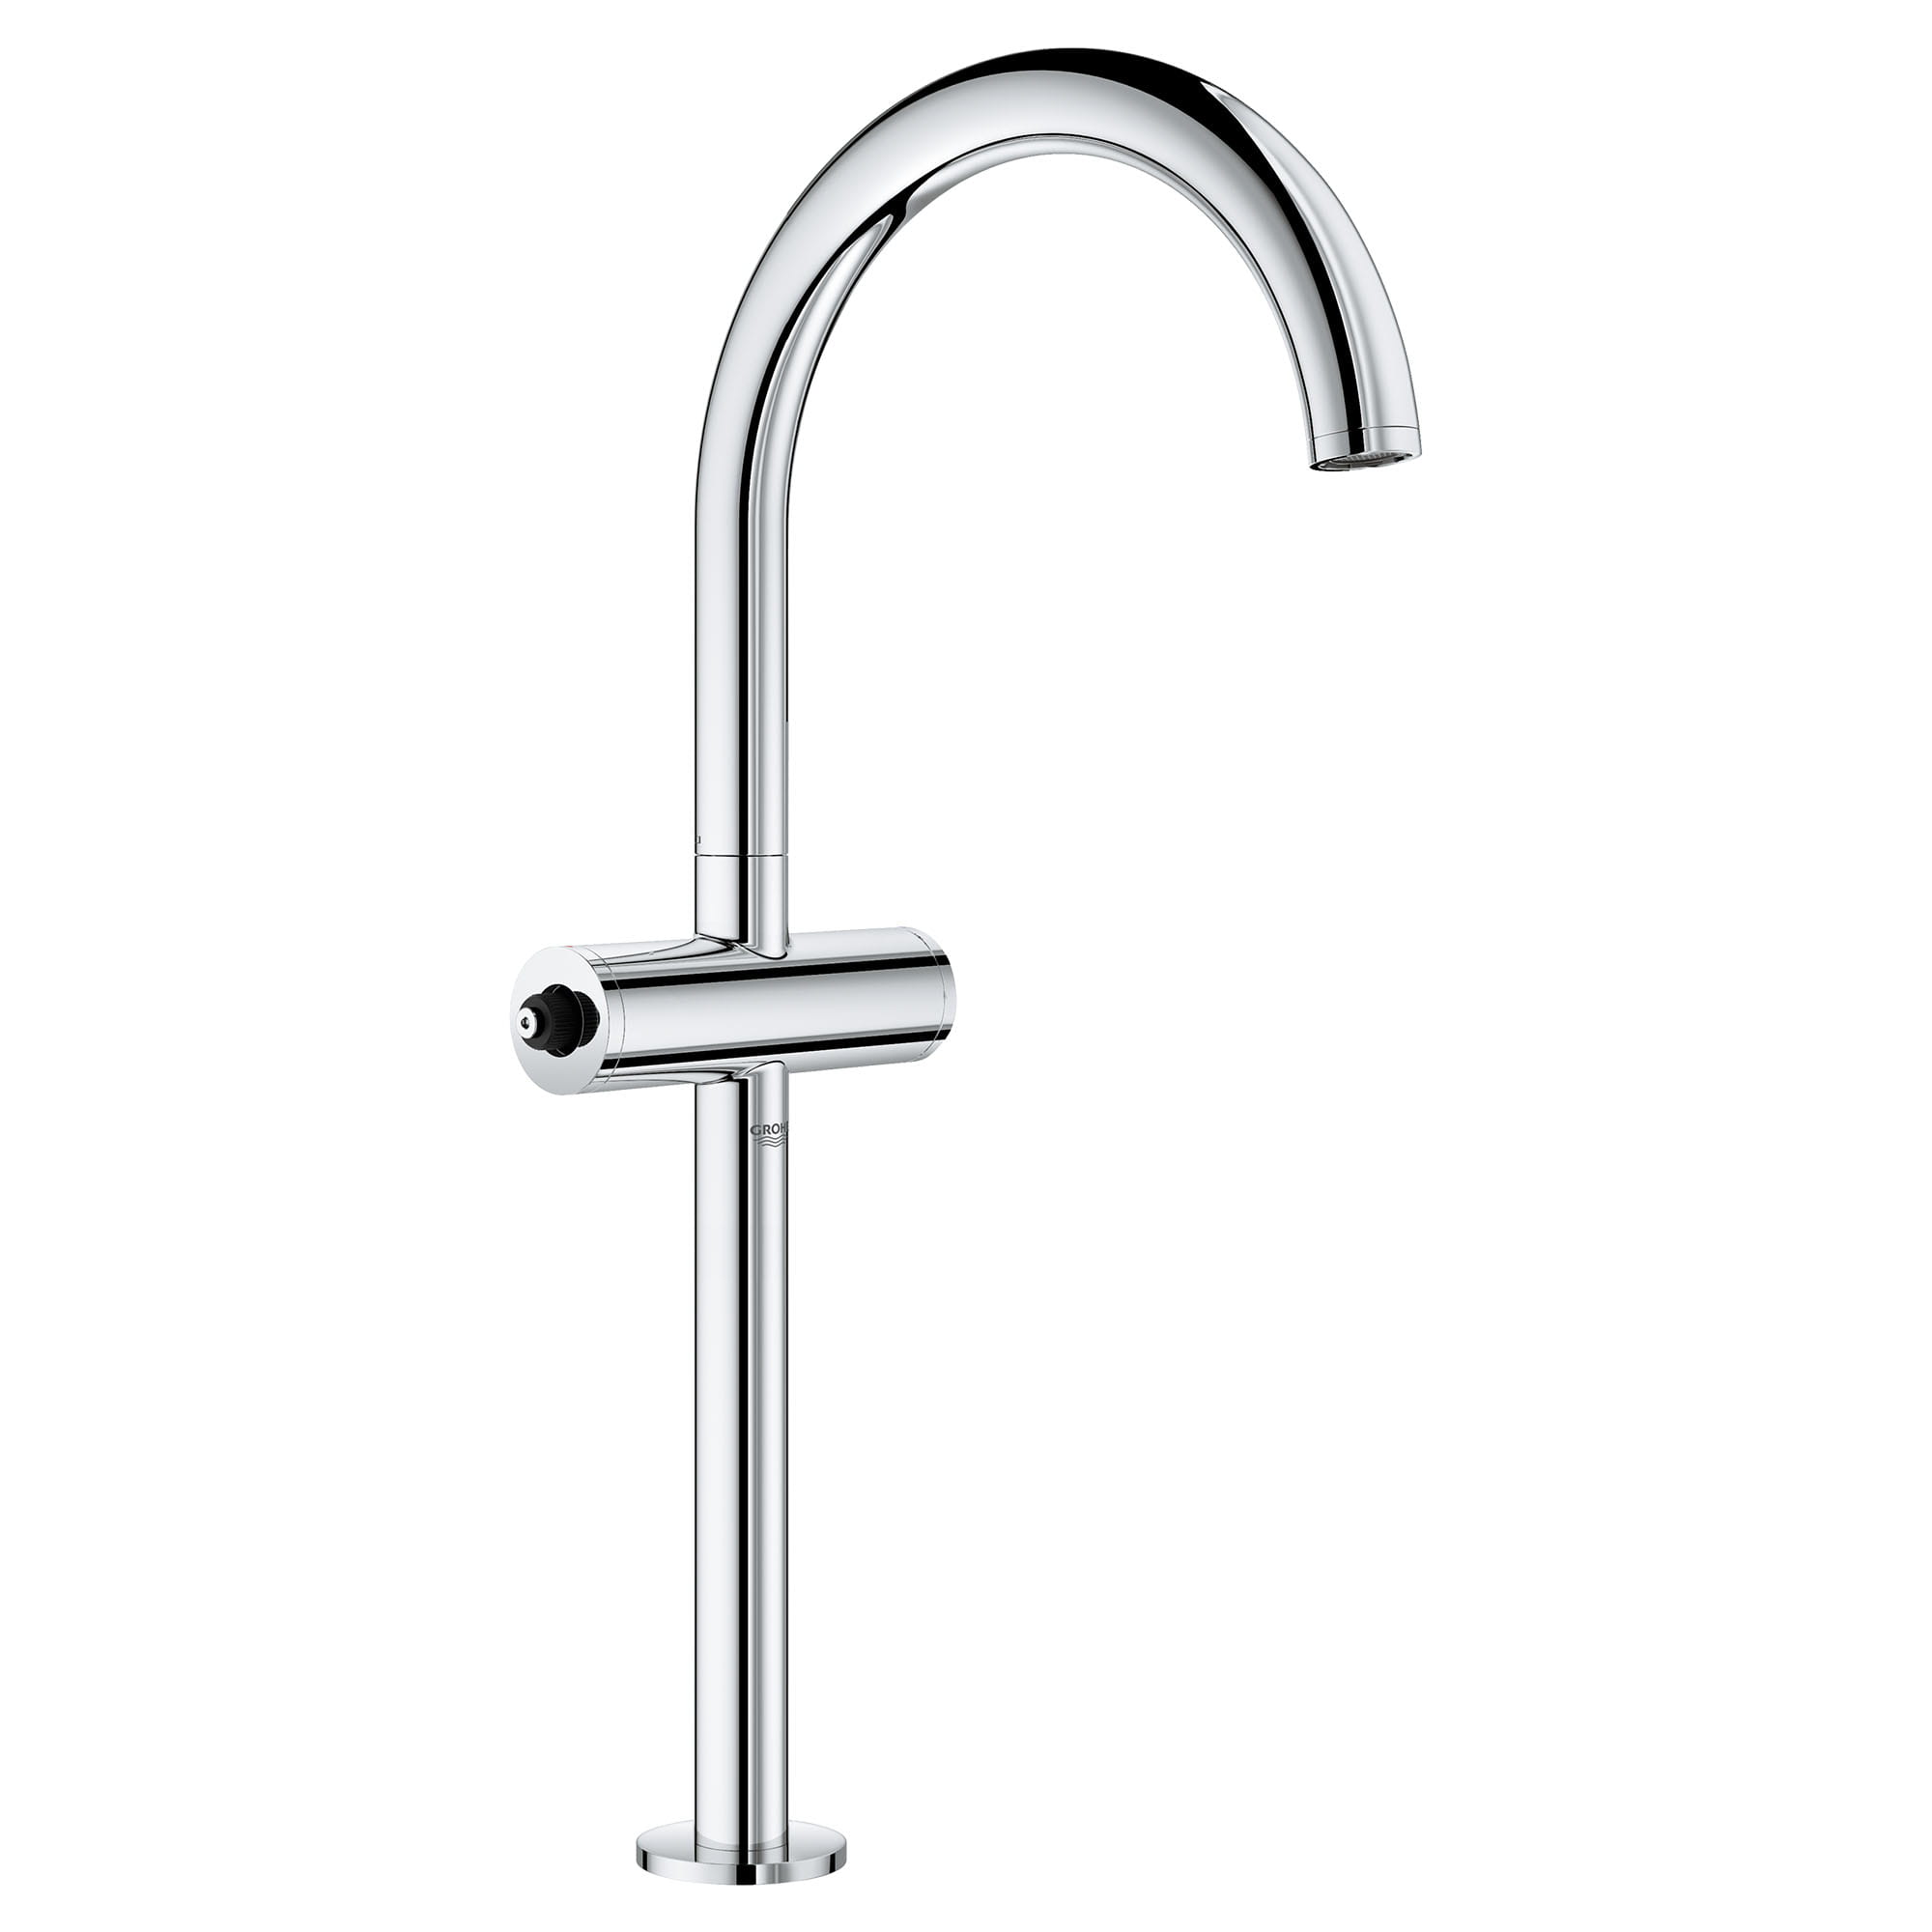 Single Hole Two Handle Deck Mount Vessel Sink Faucet 12 GPM GROHE CHROME